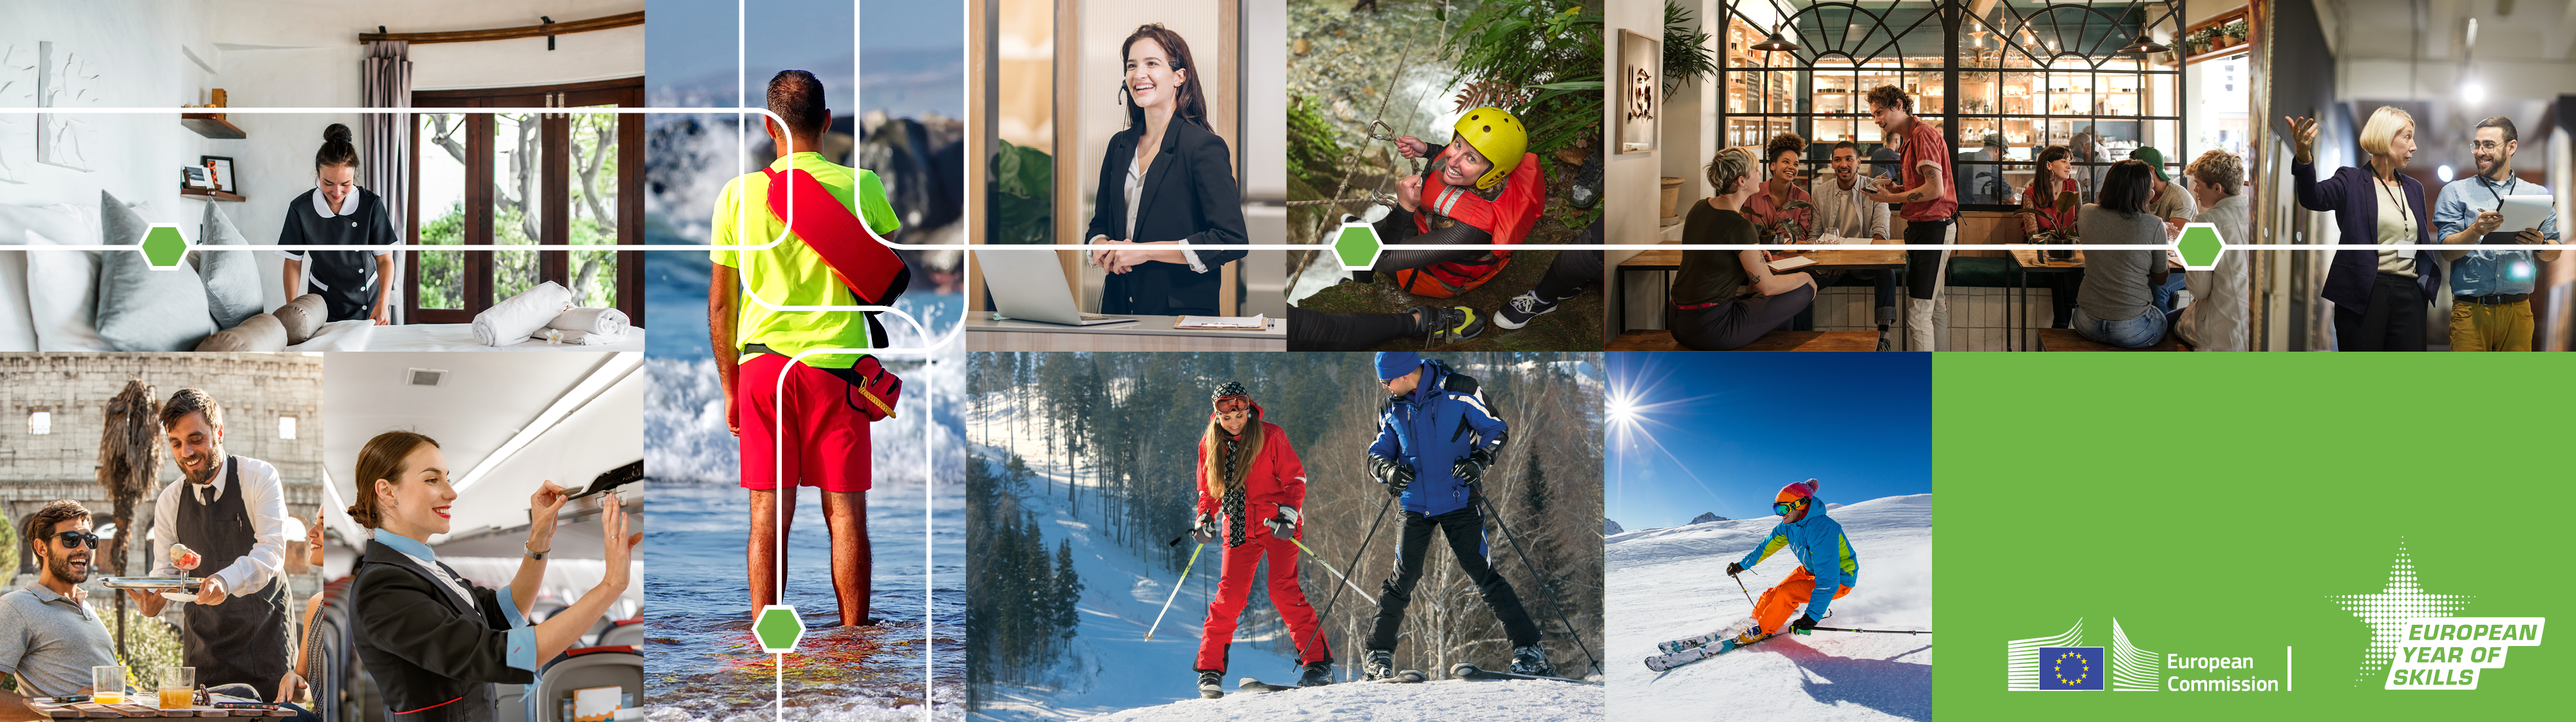 Photographs of people working in a hotel, restaurant and cafe, as an air hostess and a ski instructor. The logos for "European Commission" and "European Year of Skills" appear. 